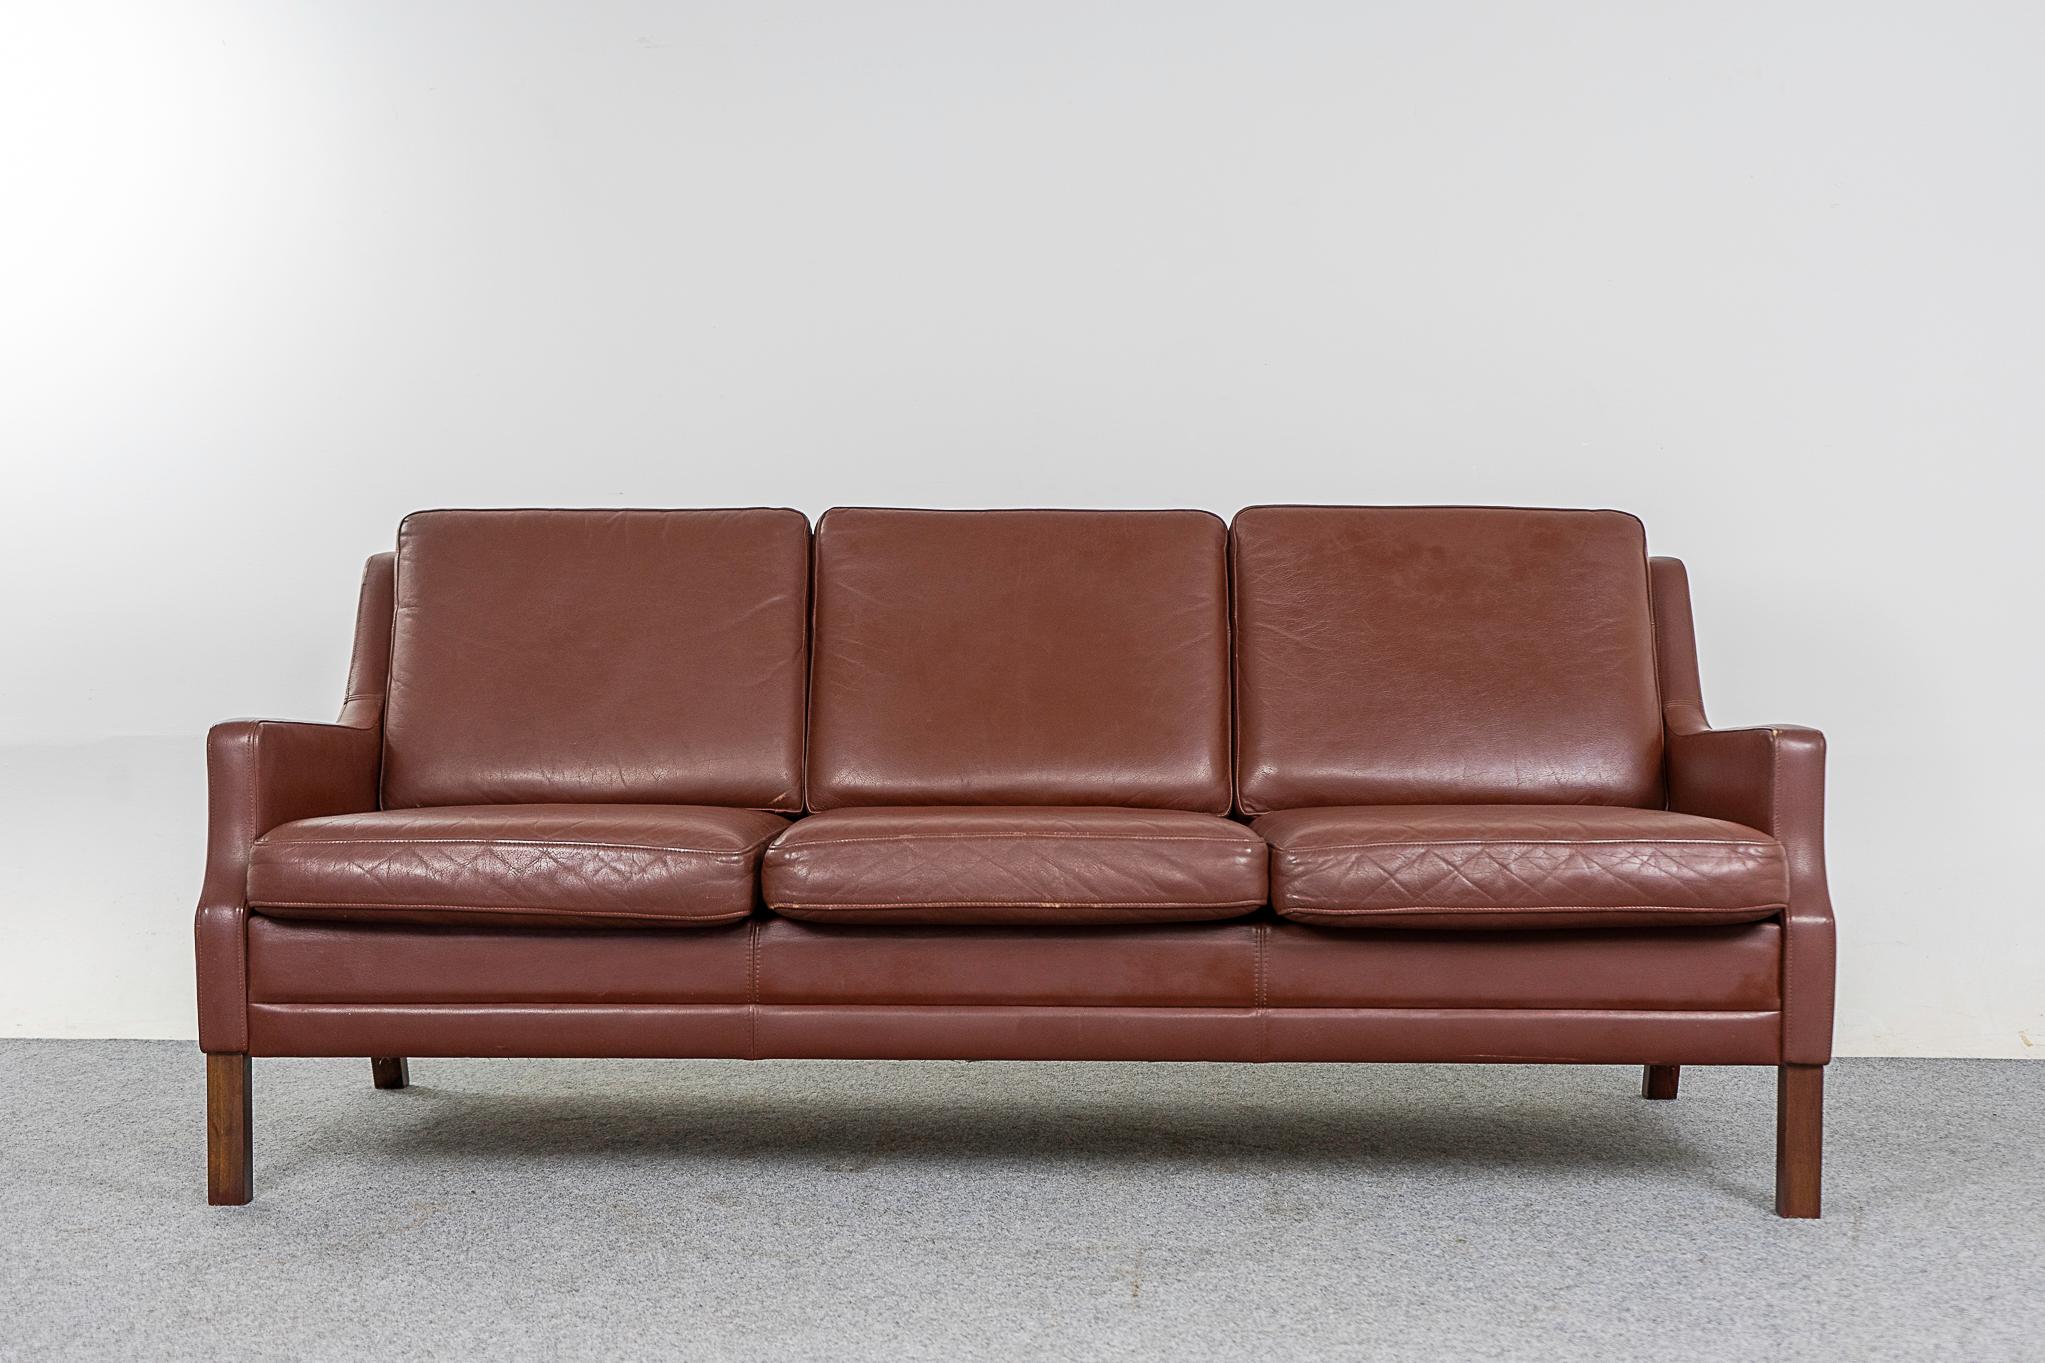 Leather Danish sofa, circa 1960's. Classic mid-century design, original brown leather is soft and supple while also being durable to ensure years of use and enjoyment!

Please inquire for remote and international shipping rates.